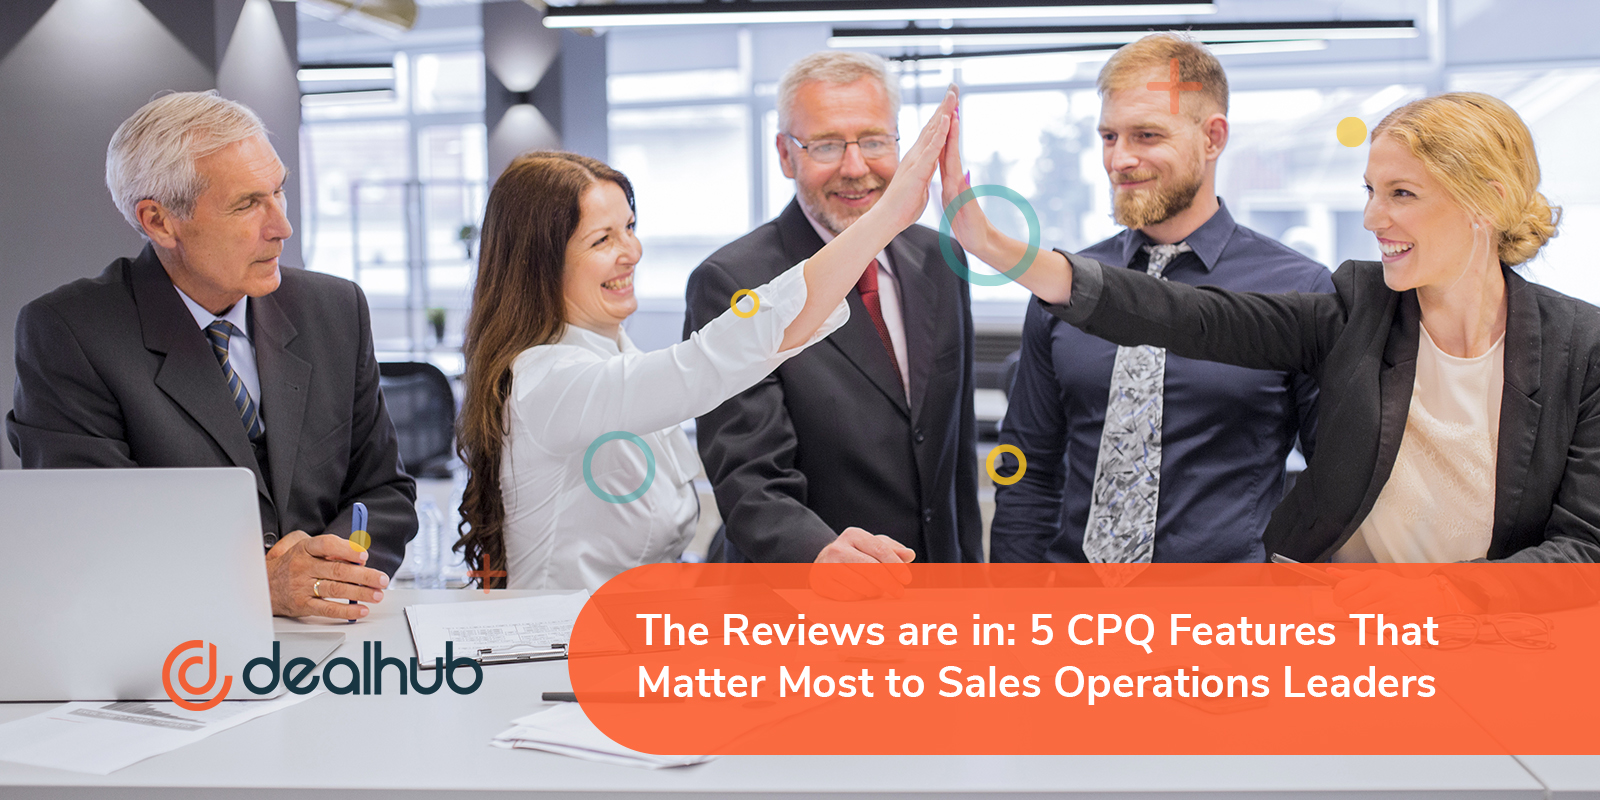 CPQ Features That Matter Most to Sales Operations Leaders